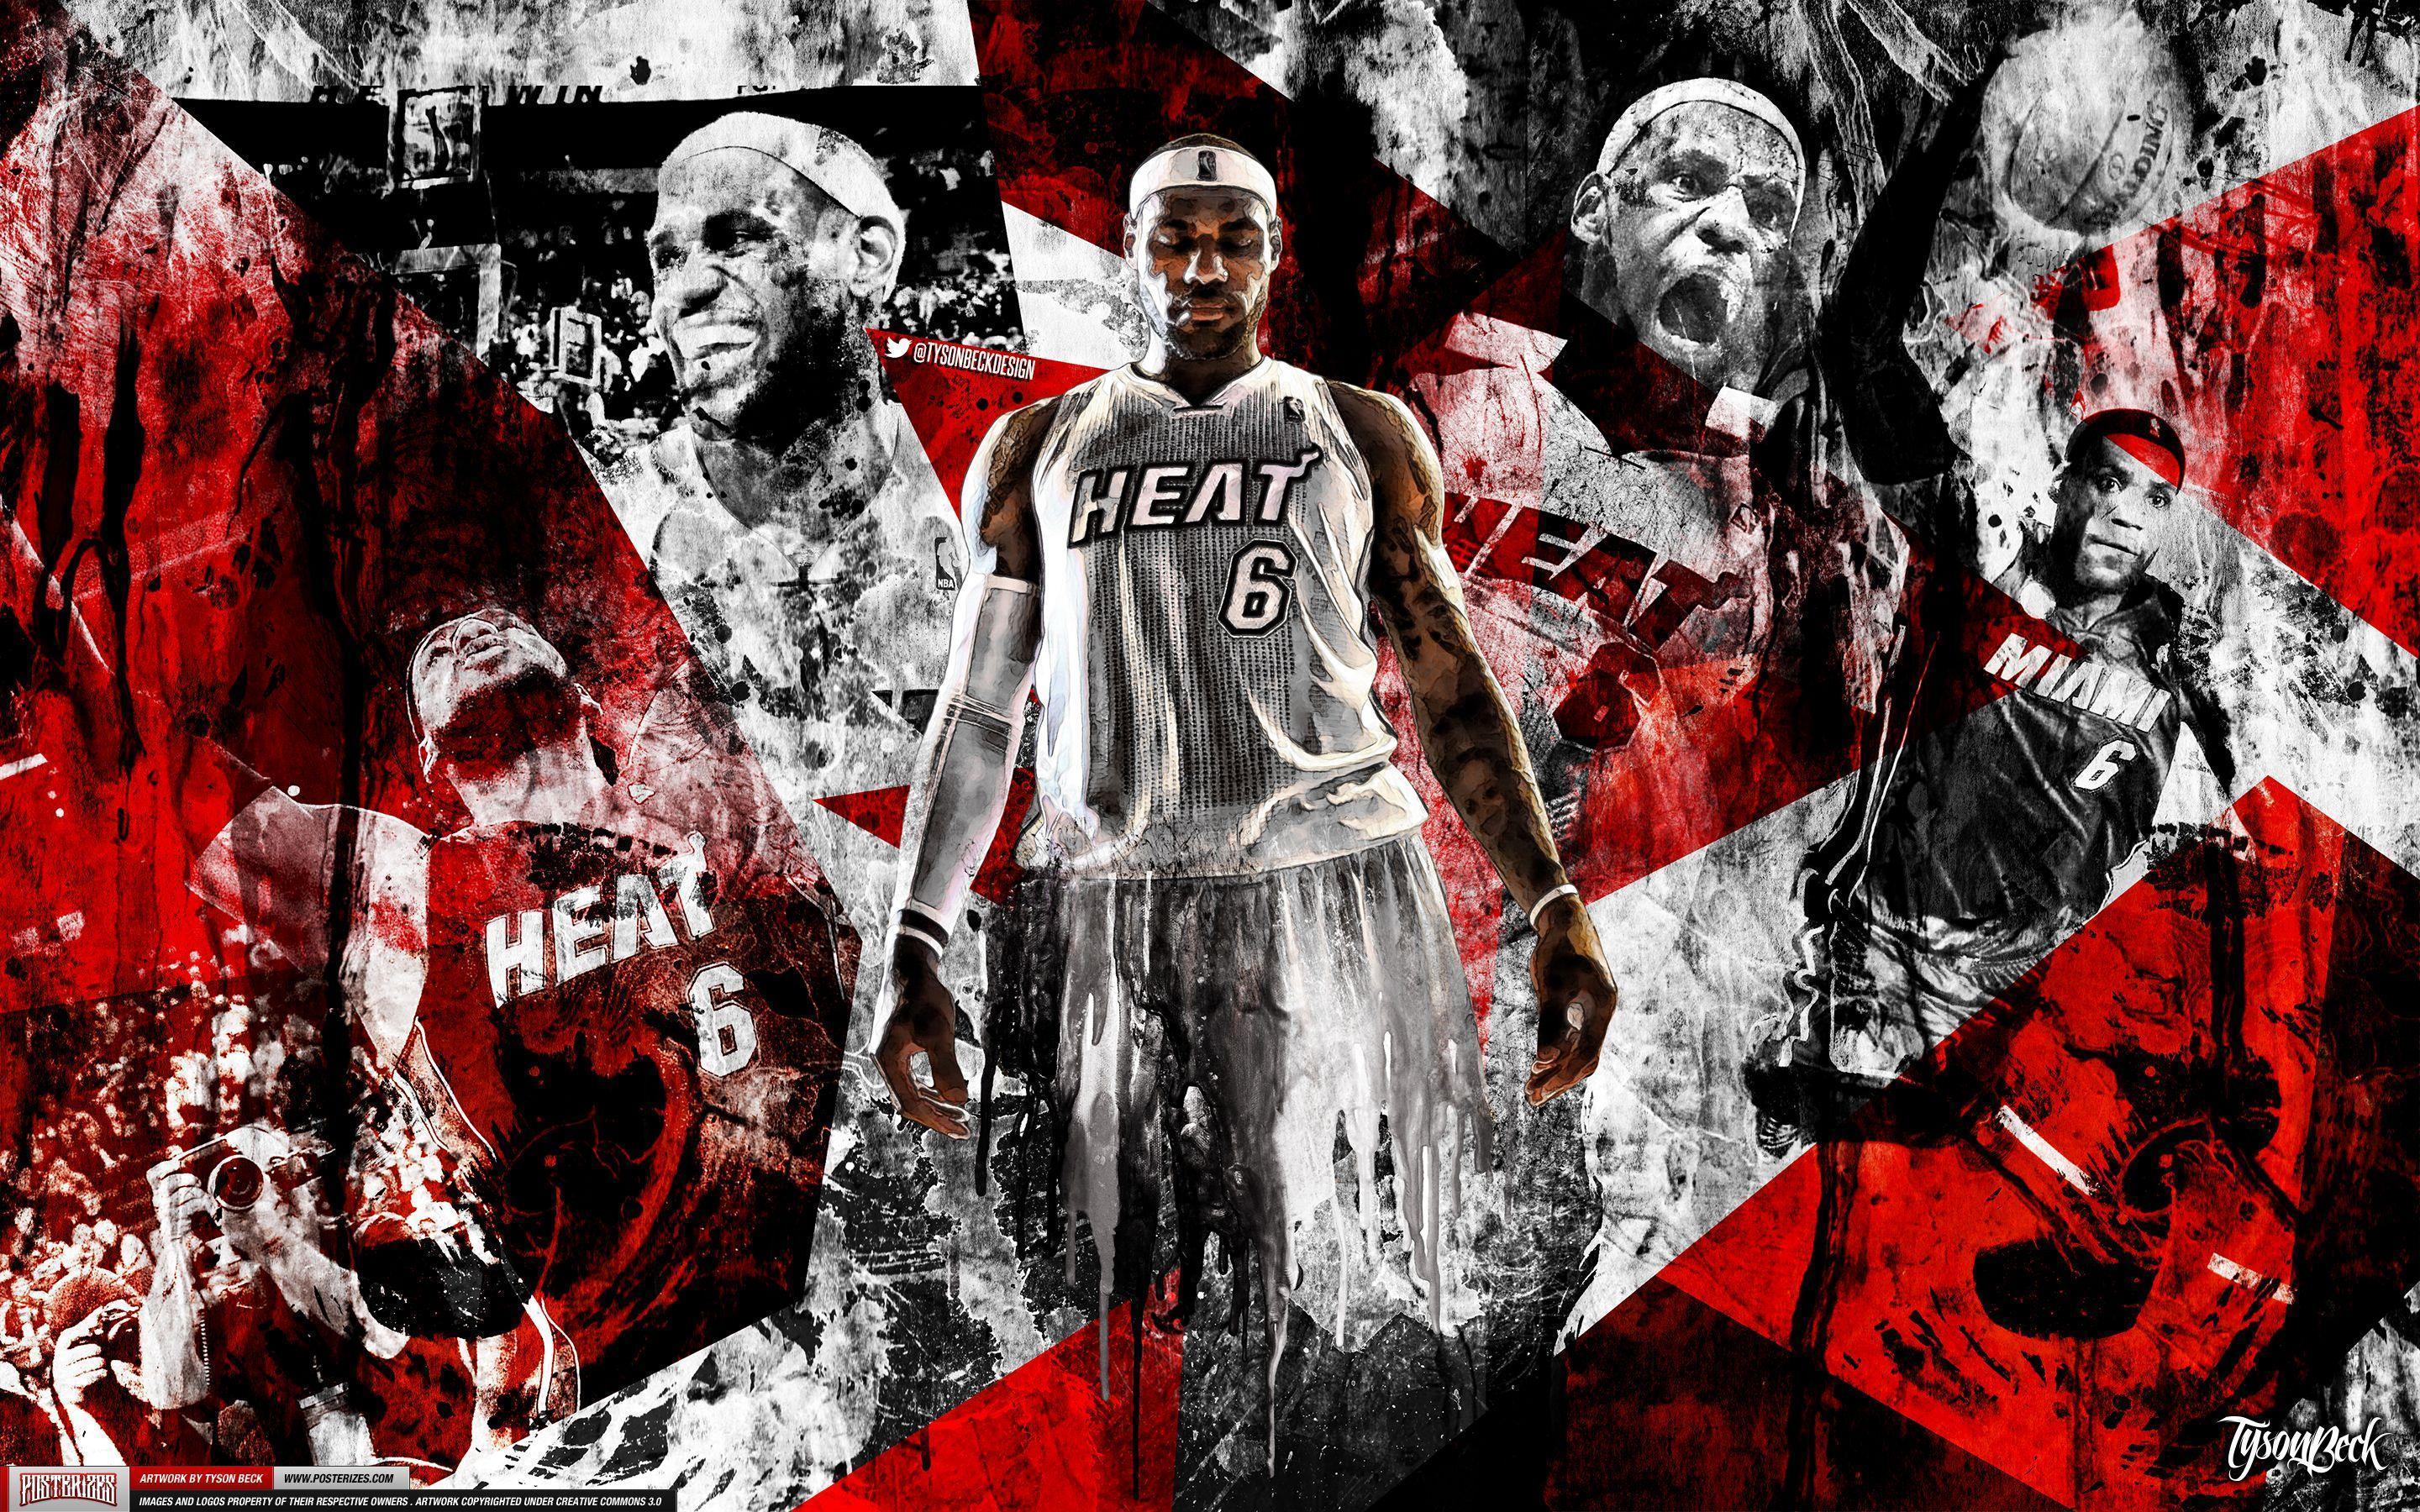 LeBron James Wallpaper High Resolution and Quality Download